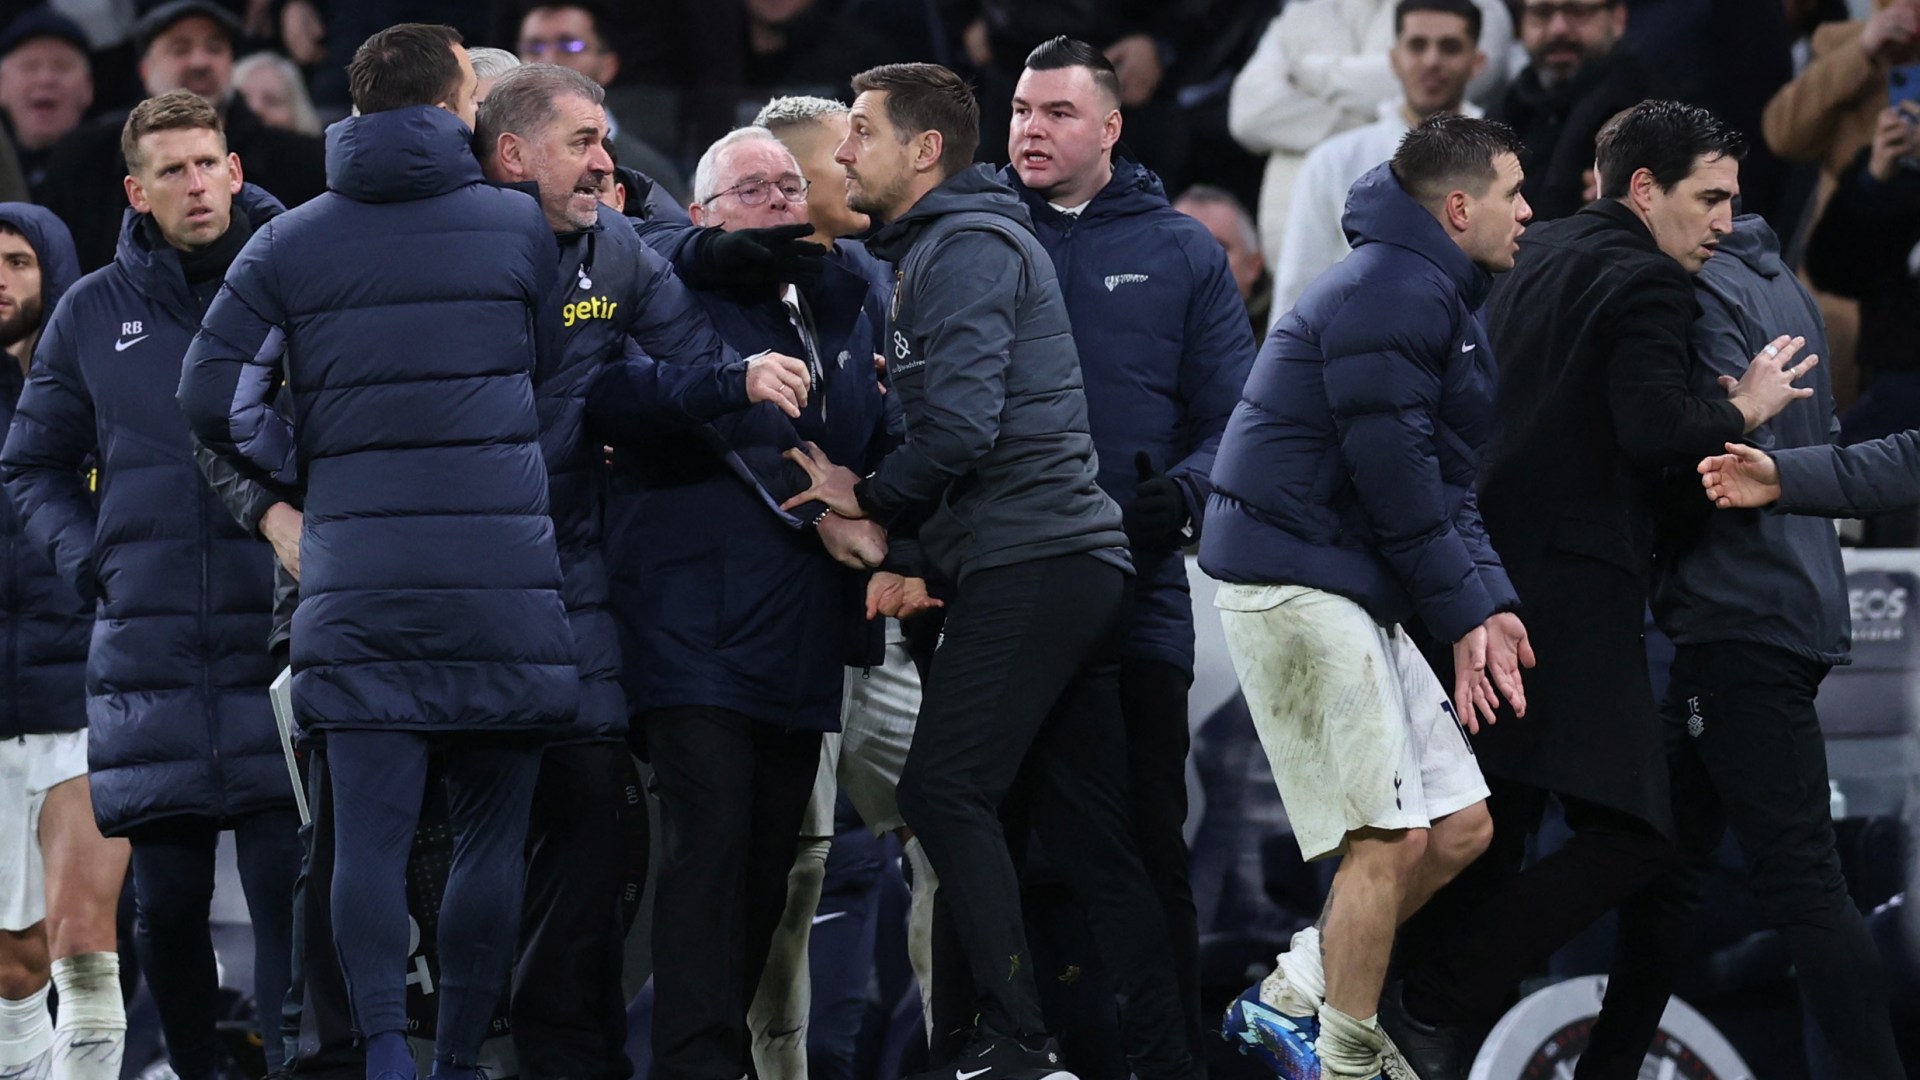 Furious Ange Postecoglou held back in heated row with Bournemouth staff as Spurs close gap on Arsenal with huge win